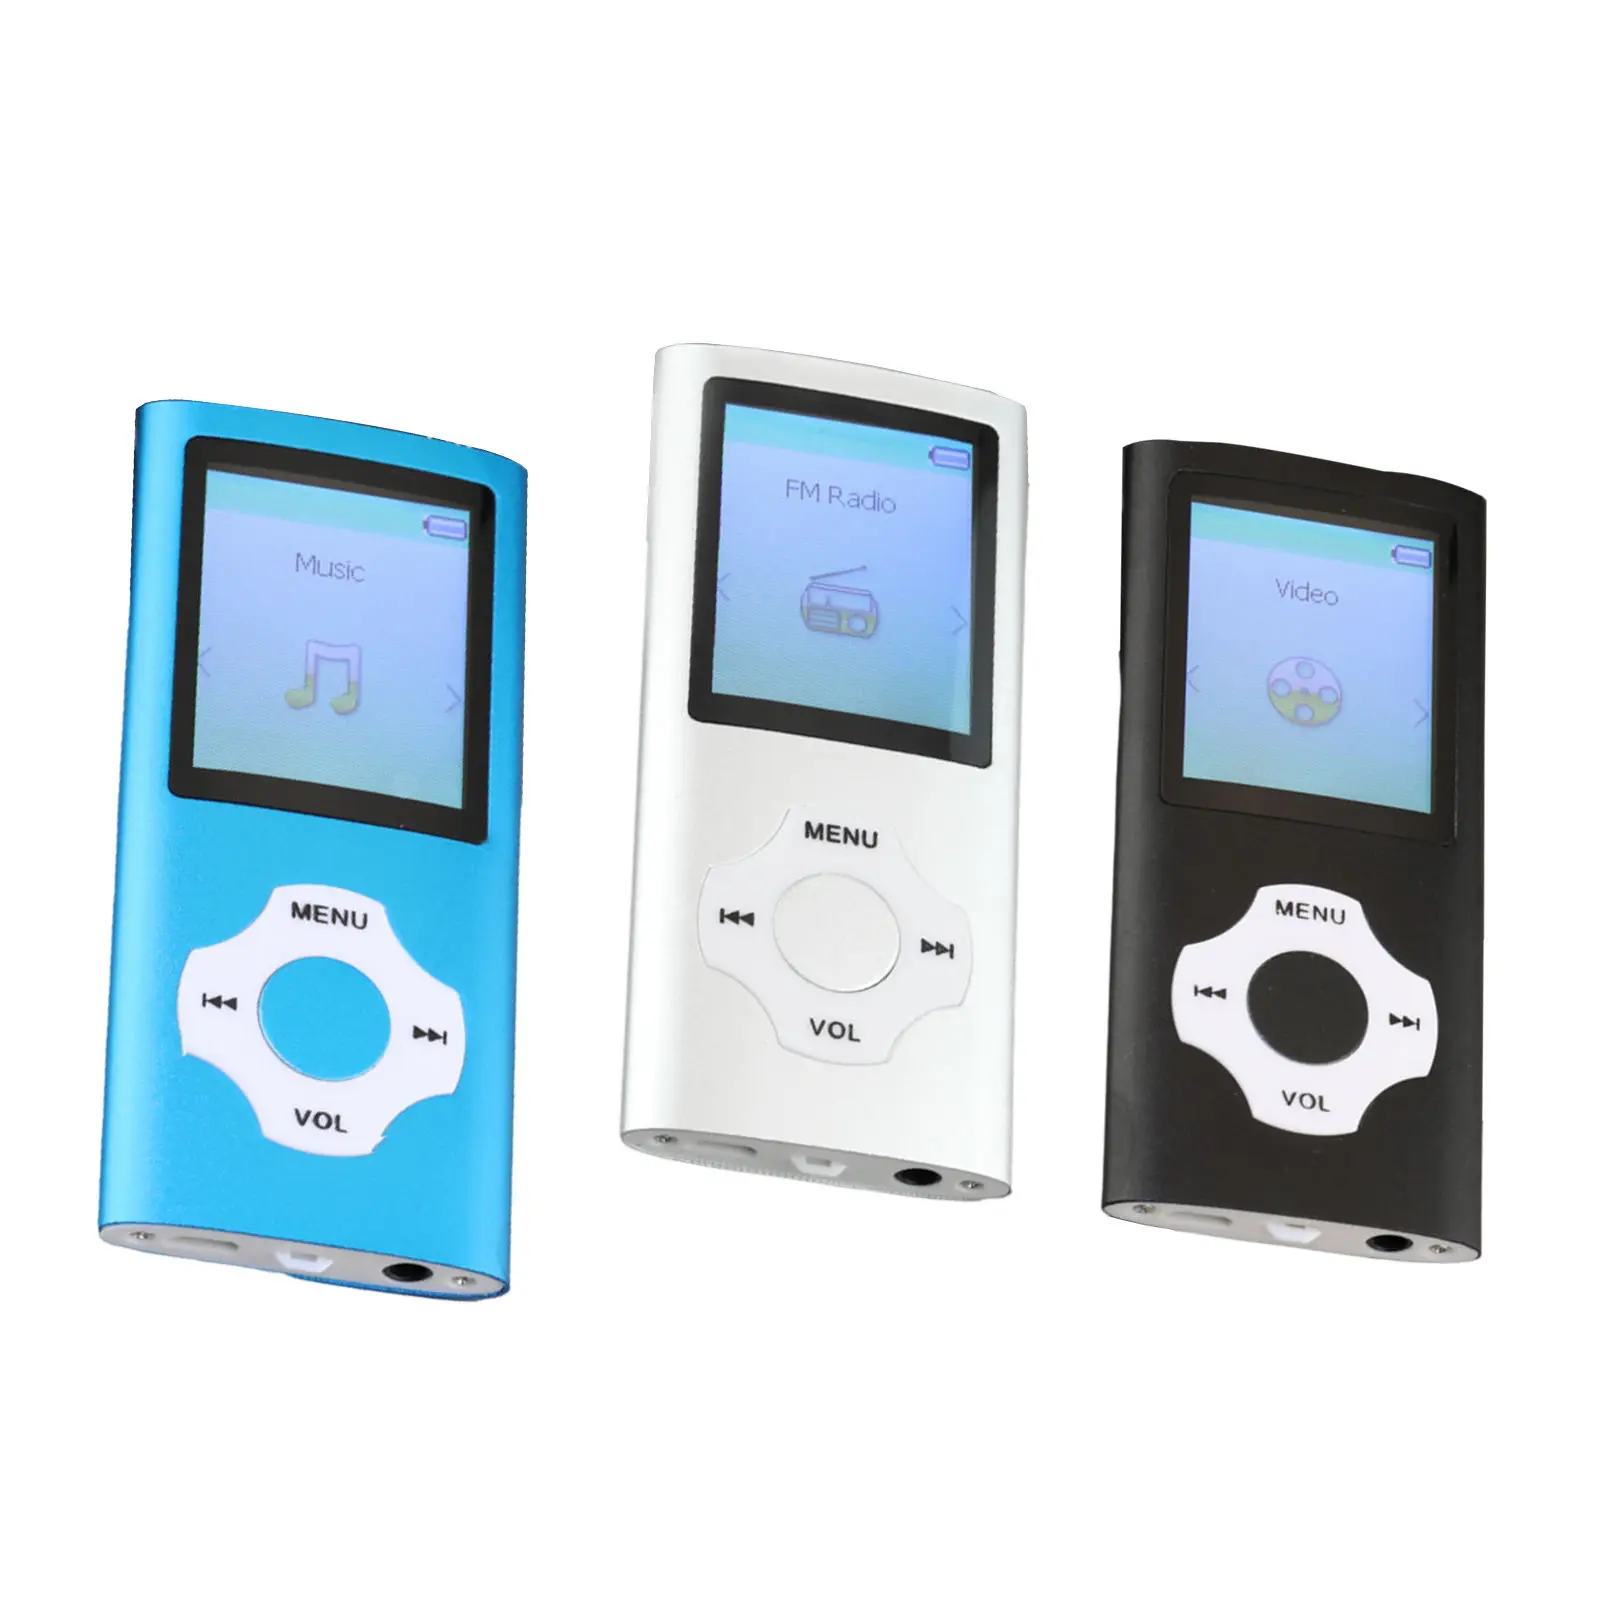 Mini MP3 Player 200mAh with FM Radio Digital LCD Long Battery Life MP4 Player for Slim Portable Lightweight Compact